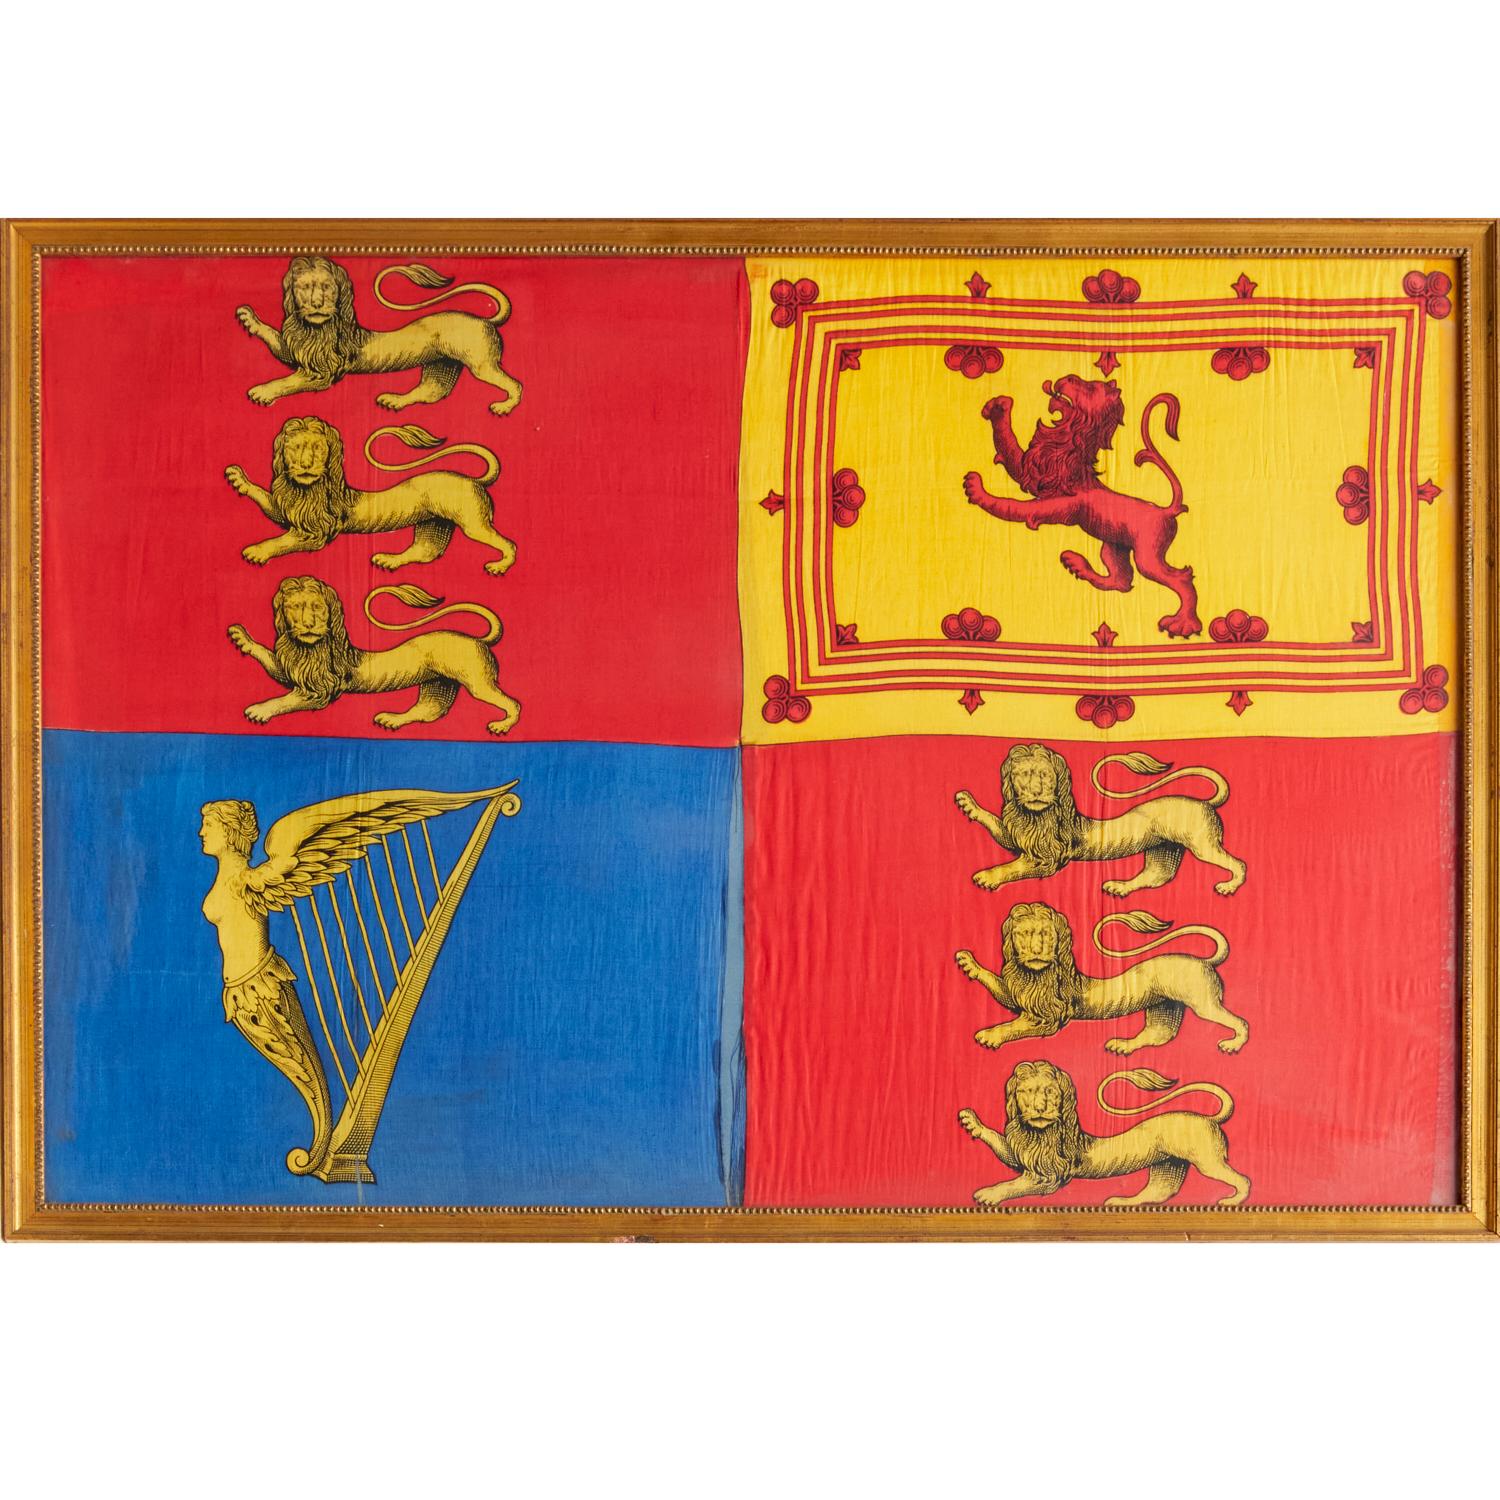 Antique Royal Standard of the United Kingdom in Giltwood Frame and Under Glass For Sale 3